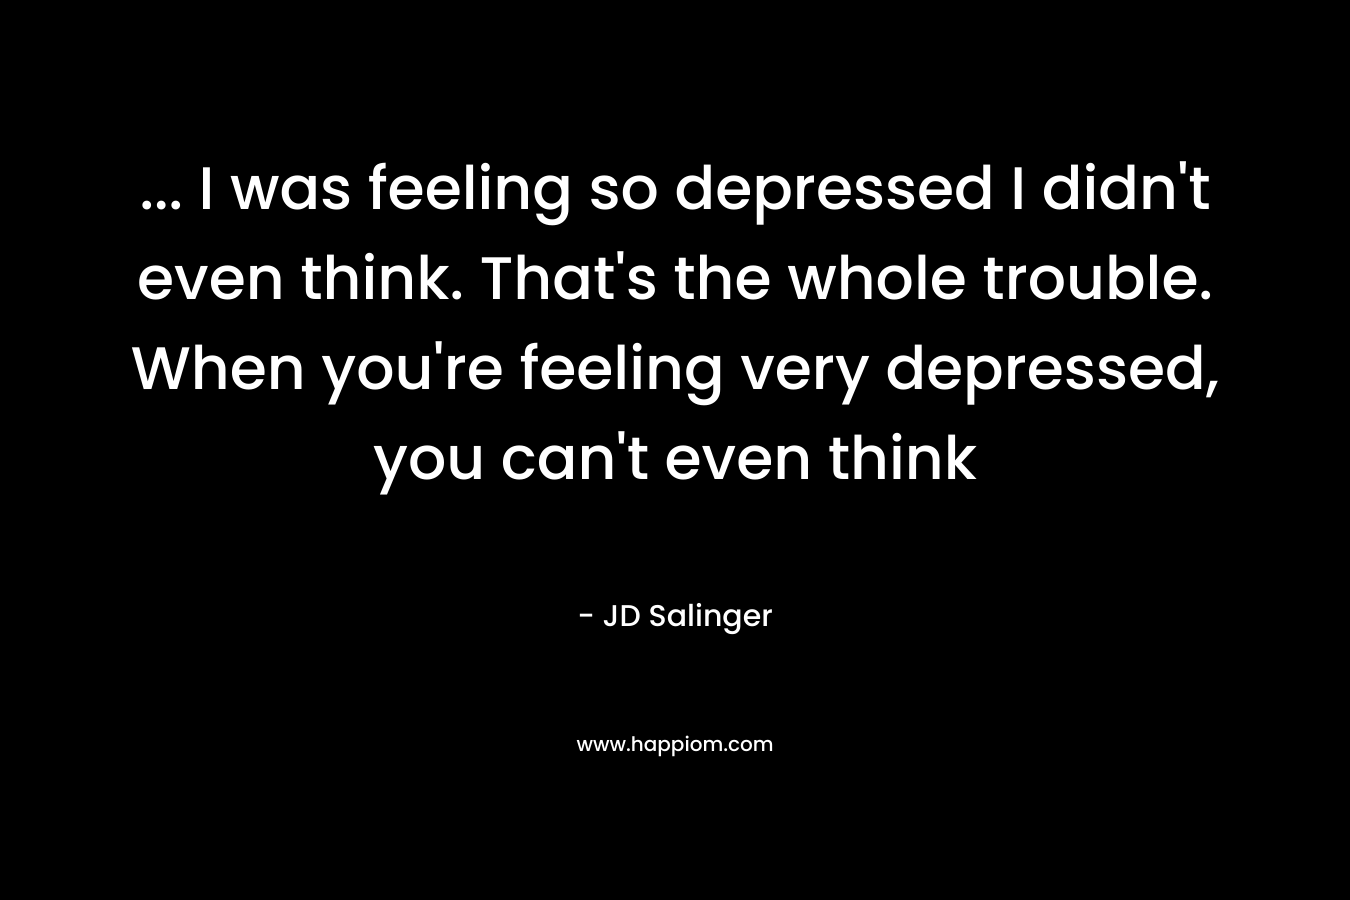 ... I was feeling so depressed I didn't even think. That's the whole trouble. When you're feeling very depressed, you can't even think